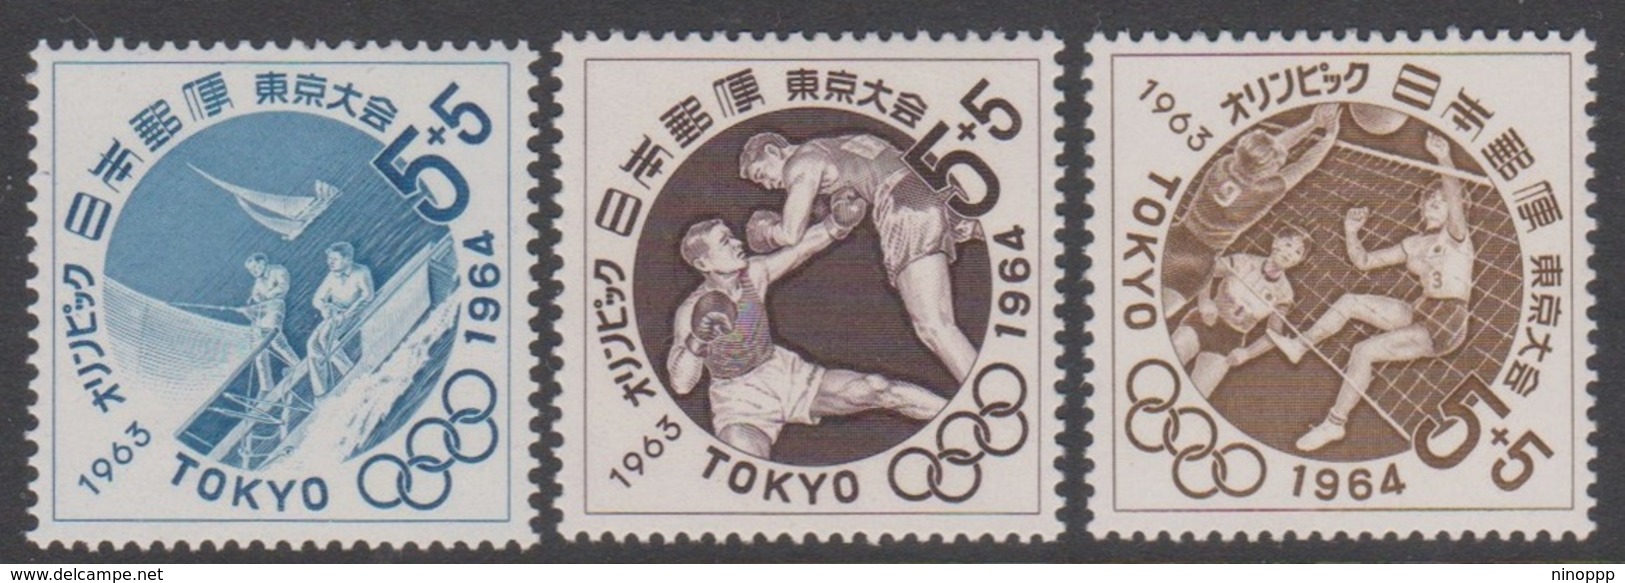 Japan SG935-937 1963 Olympic Games Tokyo 4th Issue, Mint Never Hinged - Unused Stamps